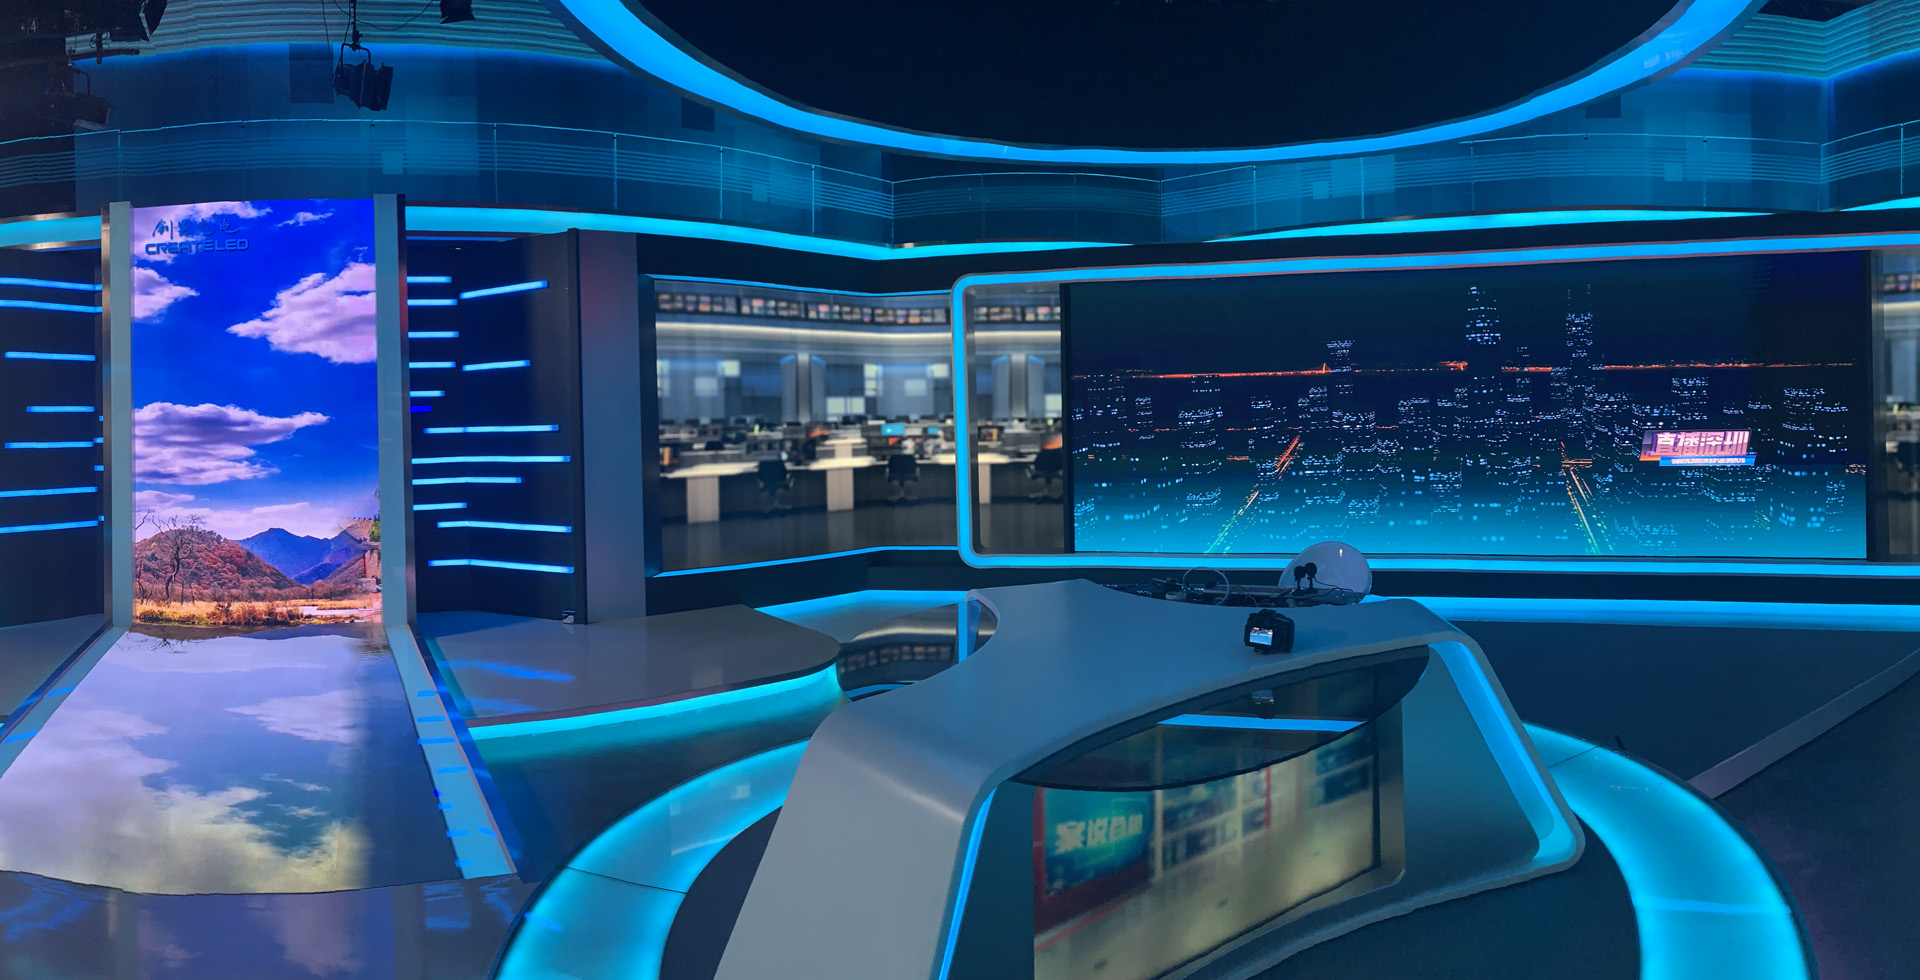   L-shaped screen in studio 3 of Shenzhen radio and Television Group